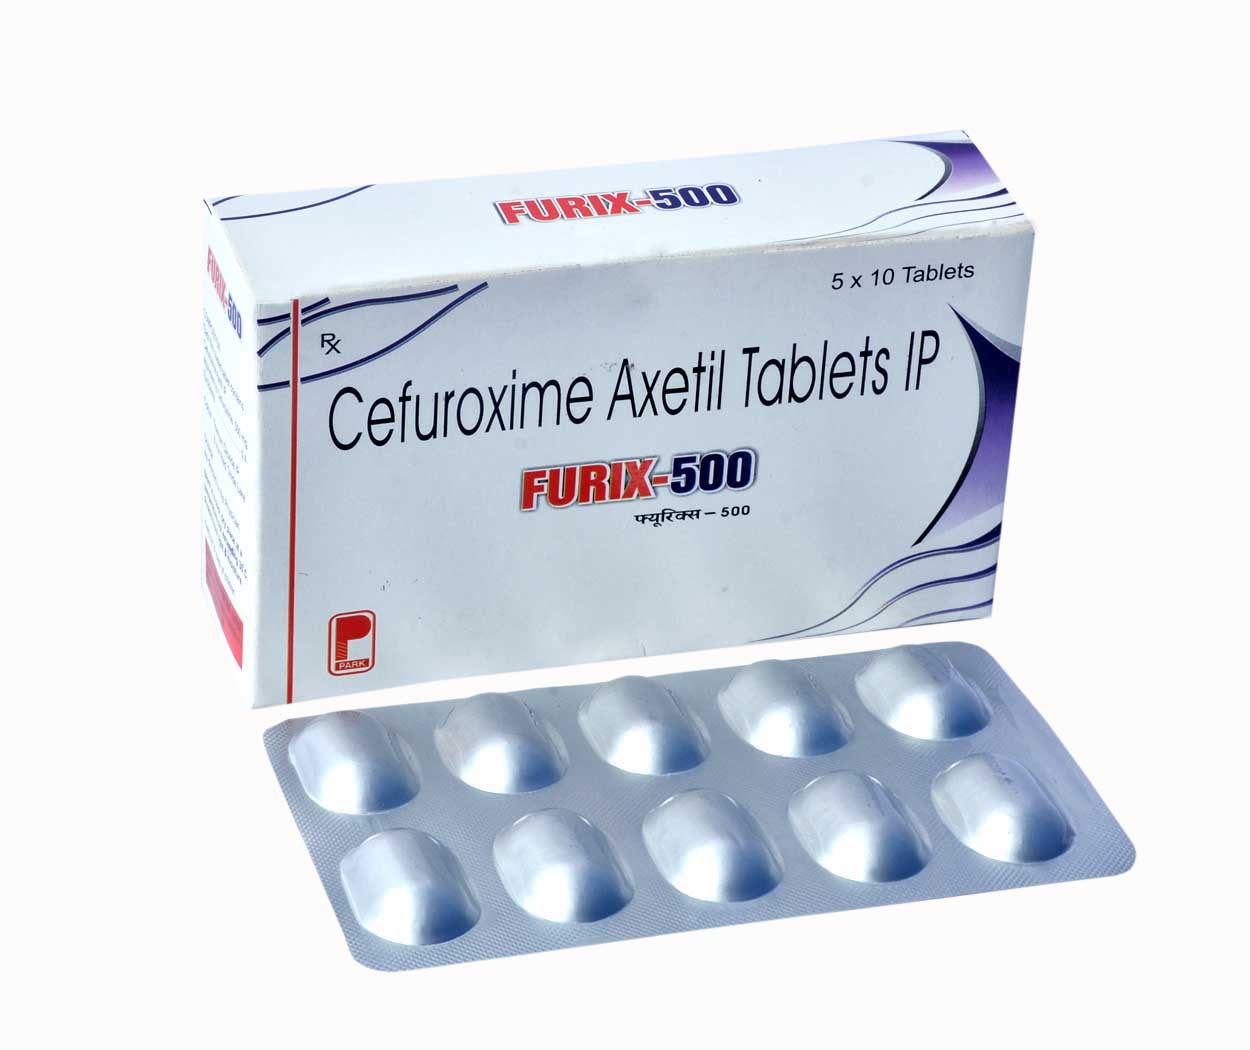 Product Name: FURIX 500, Compositions of FURIX 500 are Cefuroxime Axetil Tablets IP - Park Pharmaceuticals